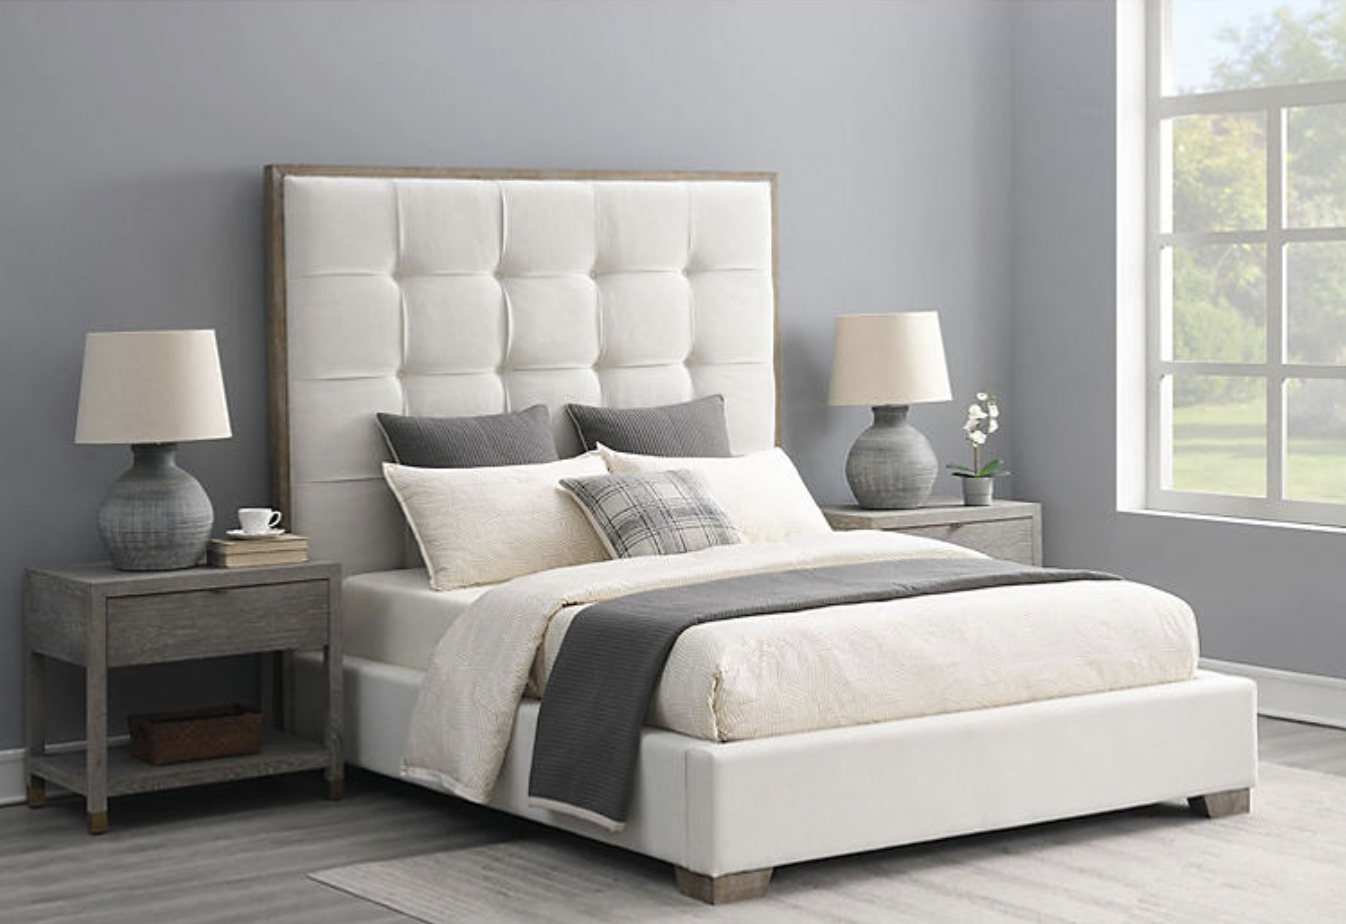 A square tufted headboard in a bedroom